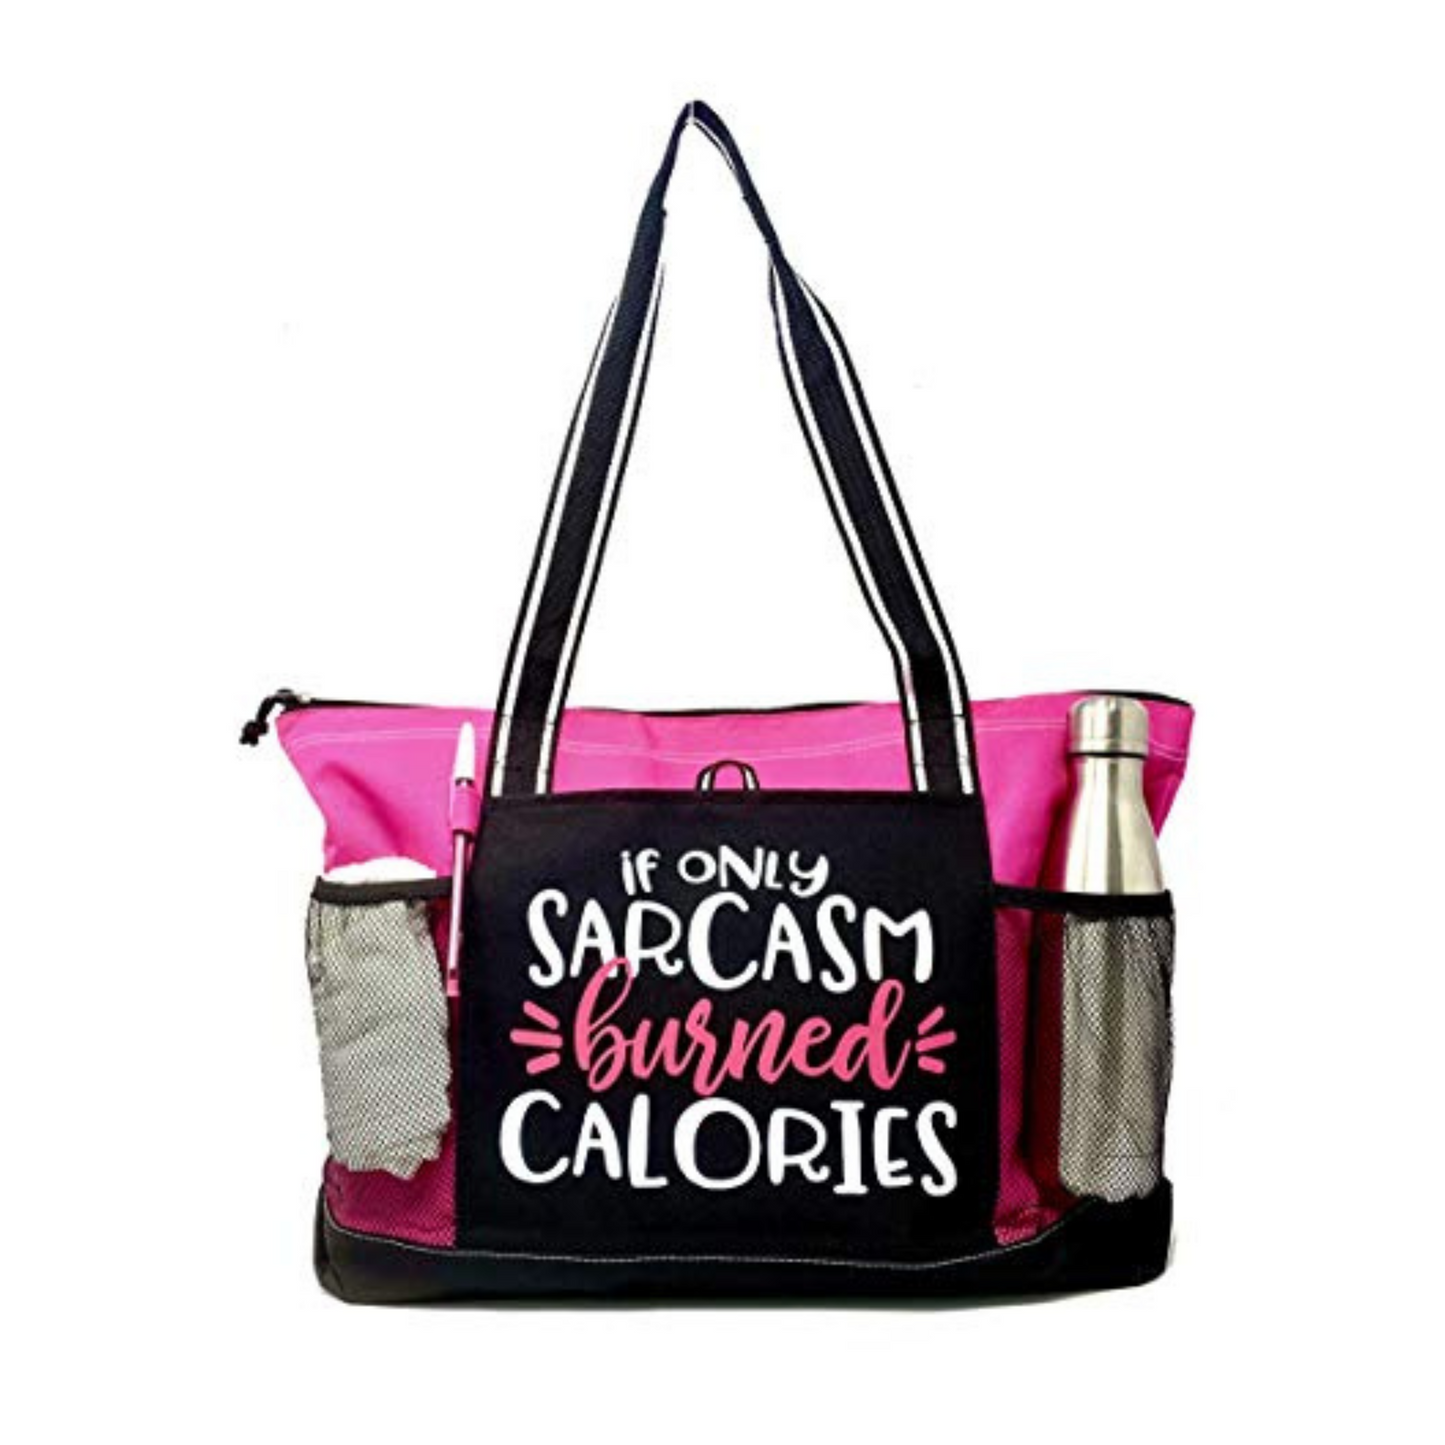 If Only Sarcasm Burned Calories Workout Gym Tote Bag - Outlet Deal Utah